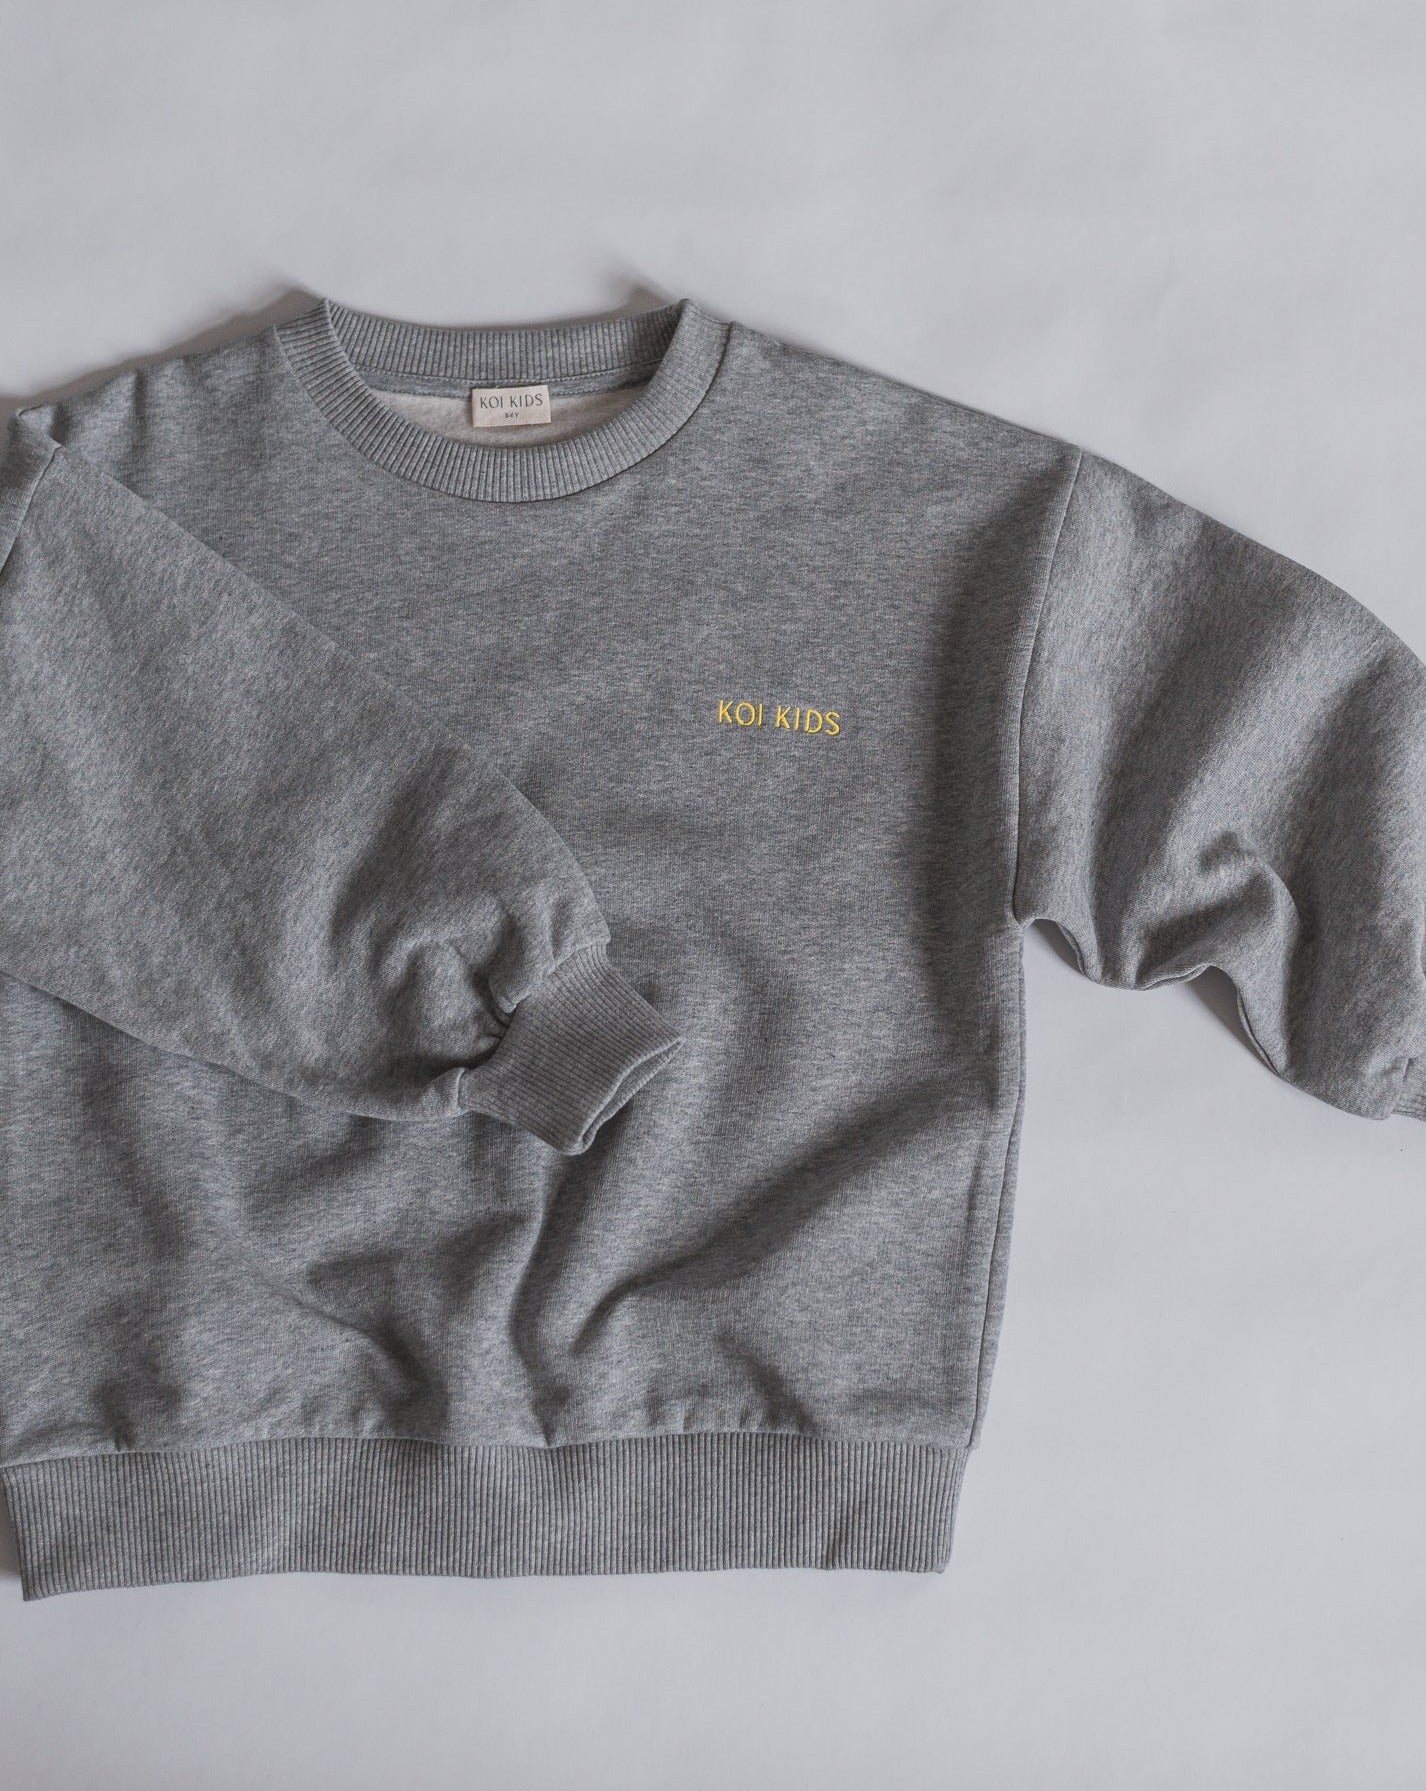 Grey mélange sweatshirt with yellow logo embroidery, dropped shoulders and foldable cuffs with an oversized fit.